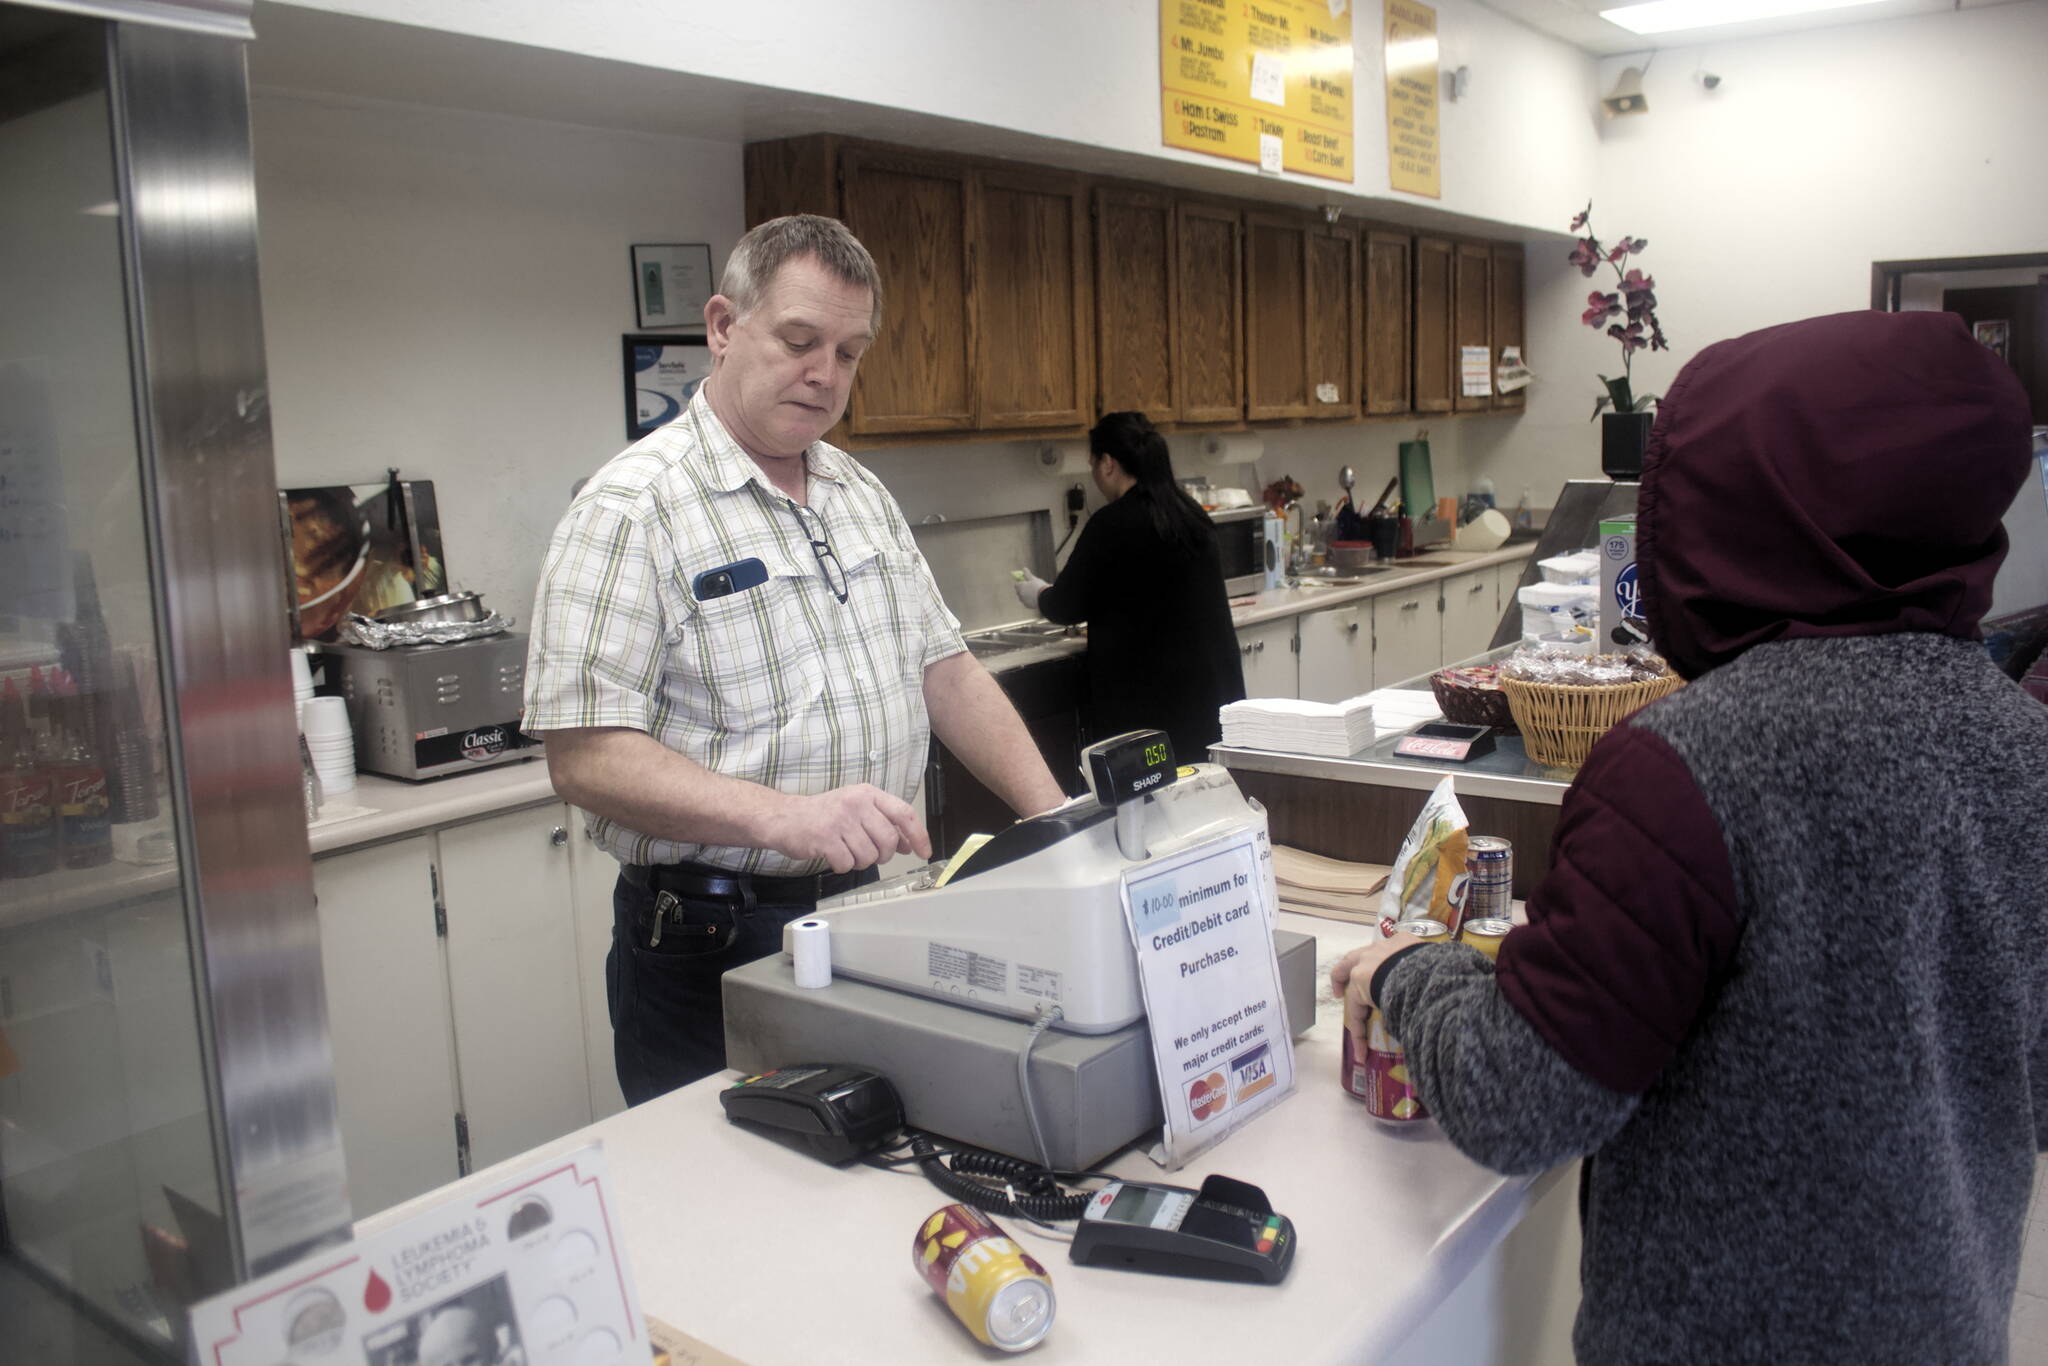 Neil Doogan, owner of J&J Deli and Asian Mart, rings up purchases while his wife Alma makes a sandwich for a customer Saturday. The deli that opened in 1979 is scheduled to close in August if a new owner can’t be found. (Mark Sabbatini / Juneau Empire)